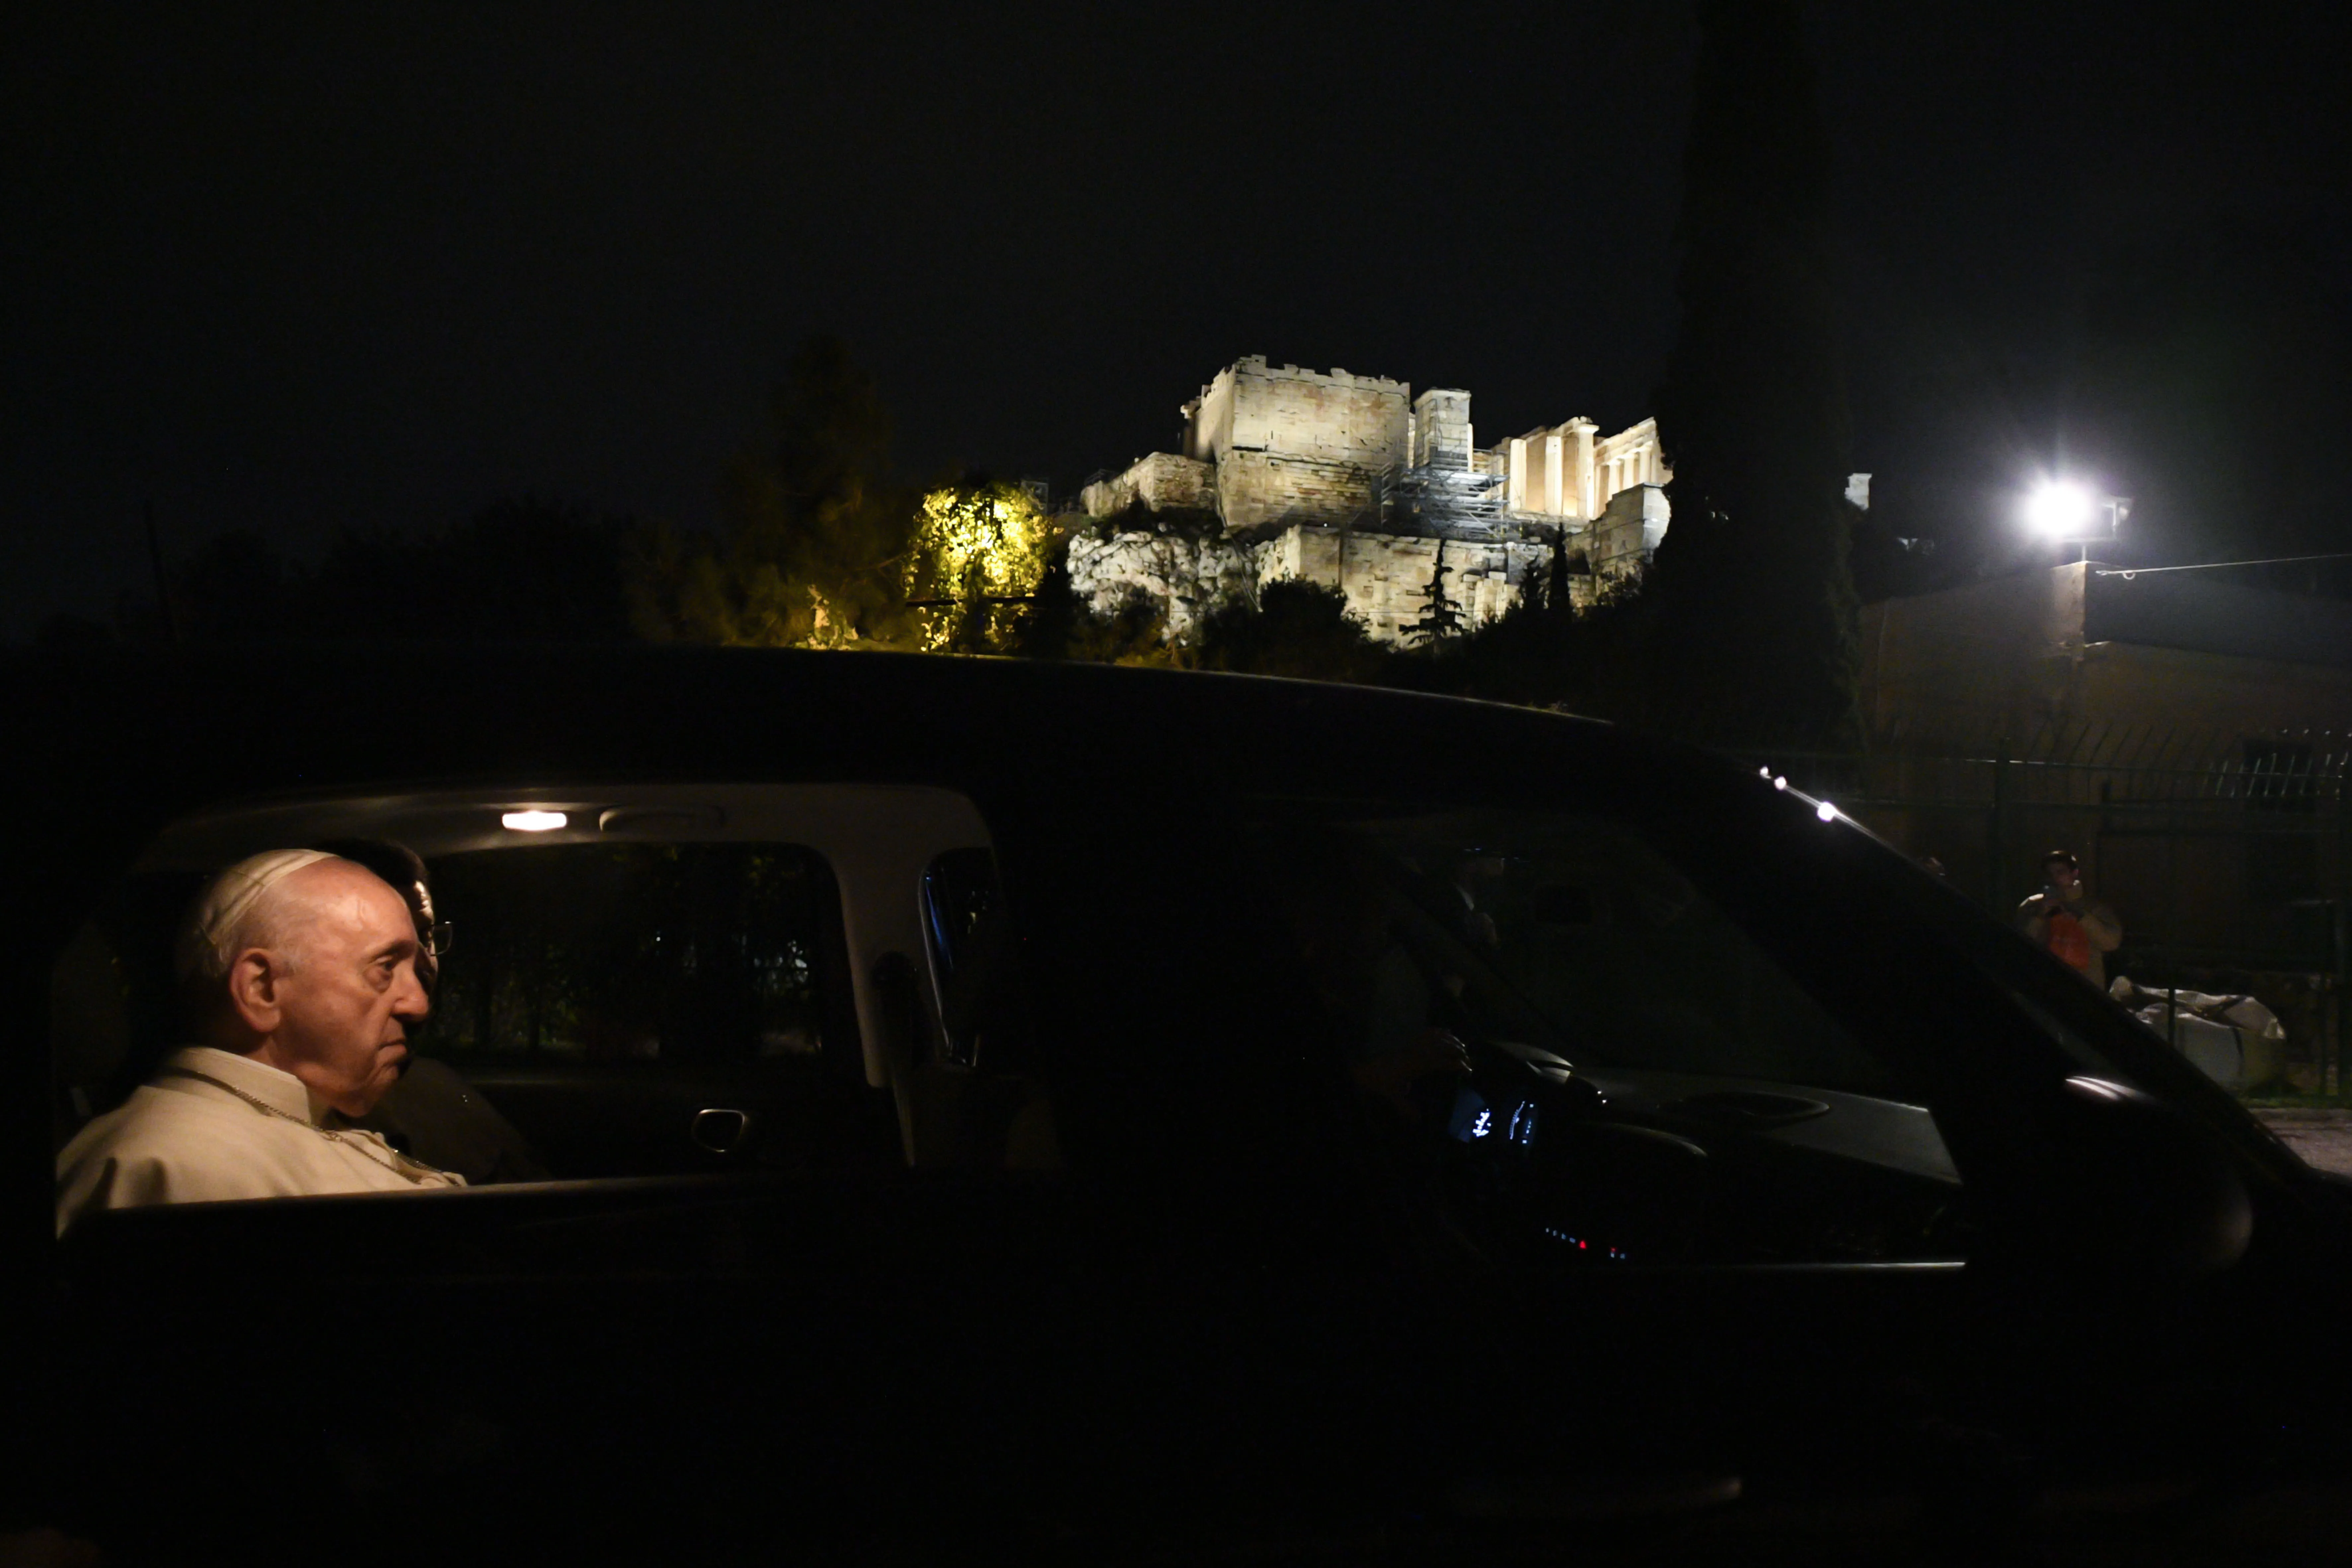 Pope Francis made a brief stop to see the Parthenon lit up at night during his visit to Athens in December 2021. Vatican Media